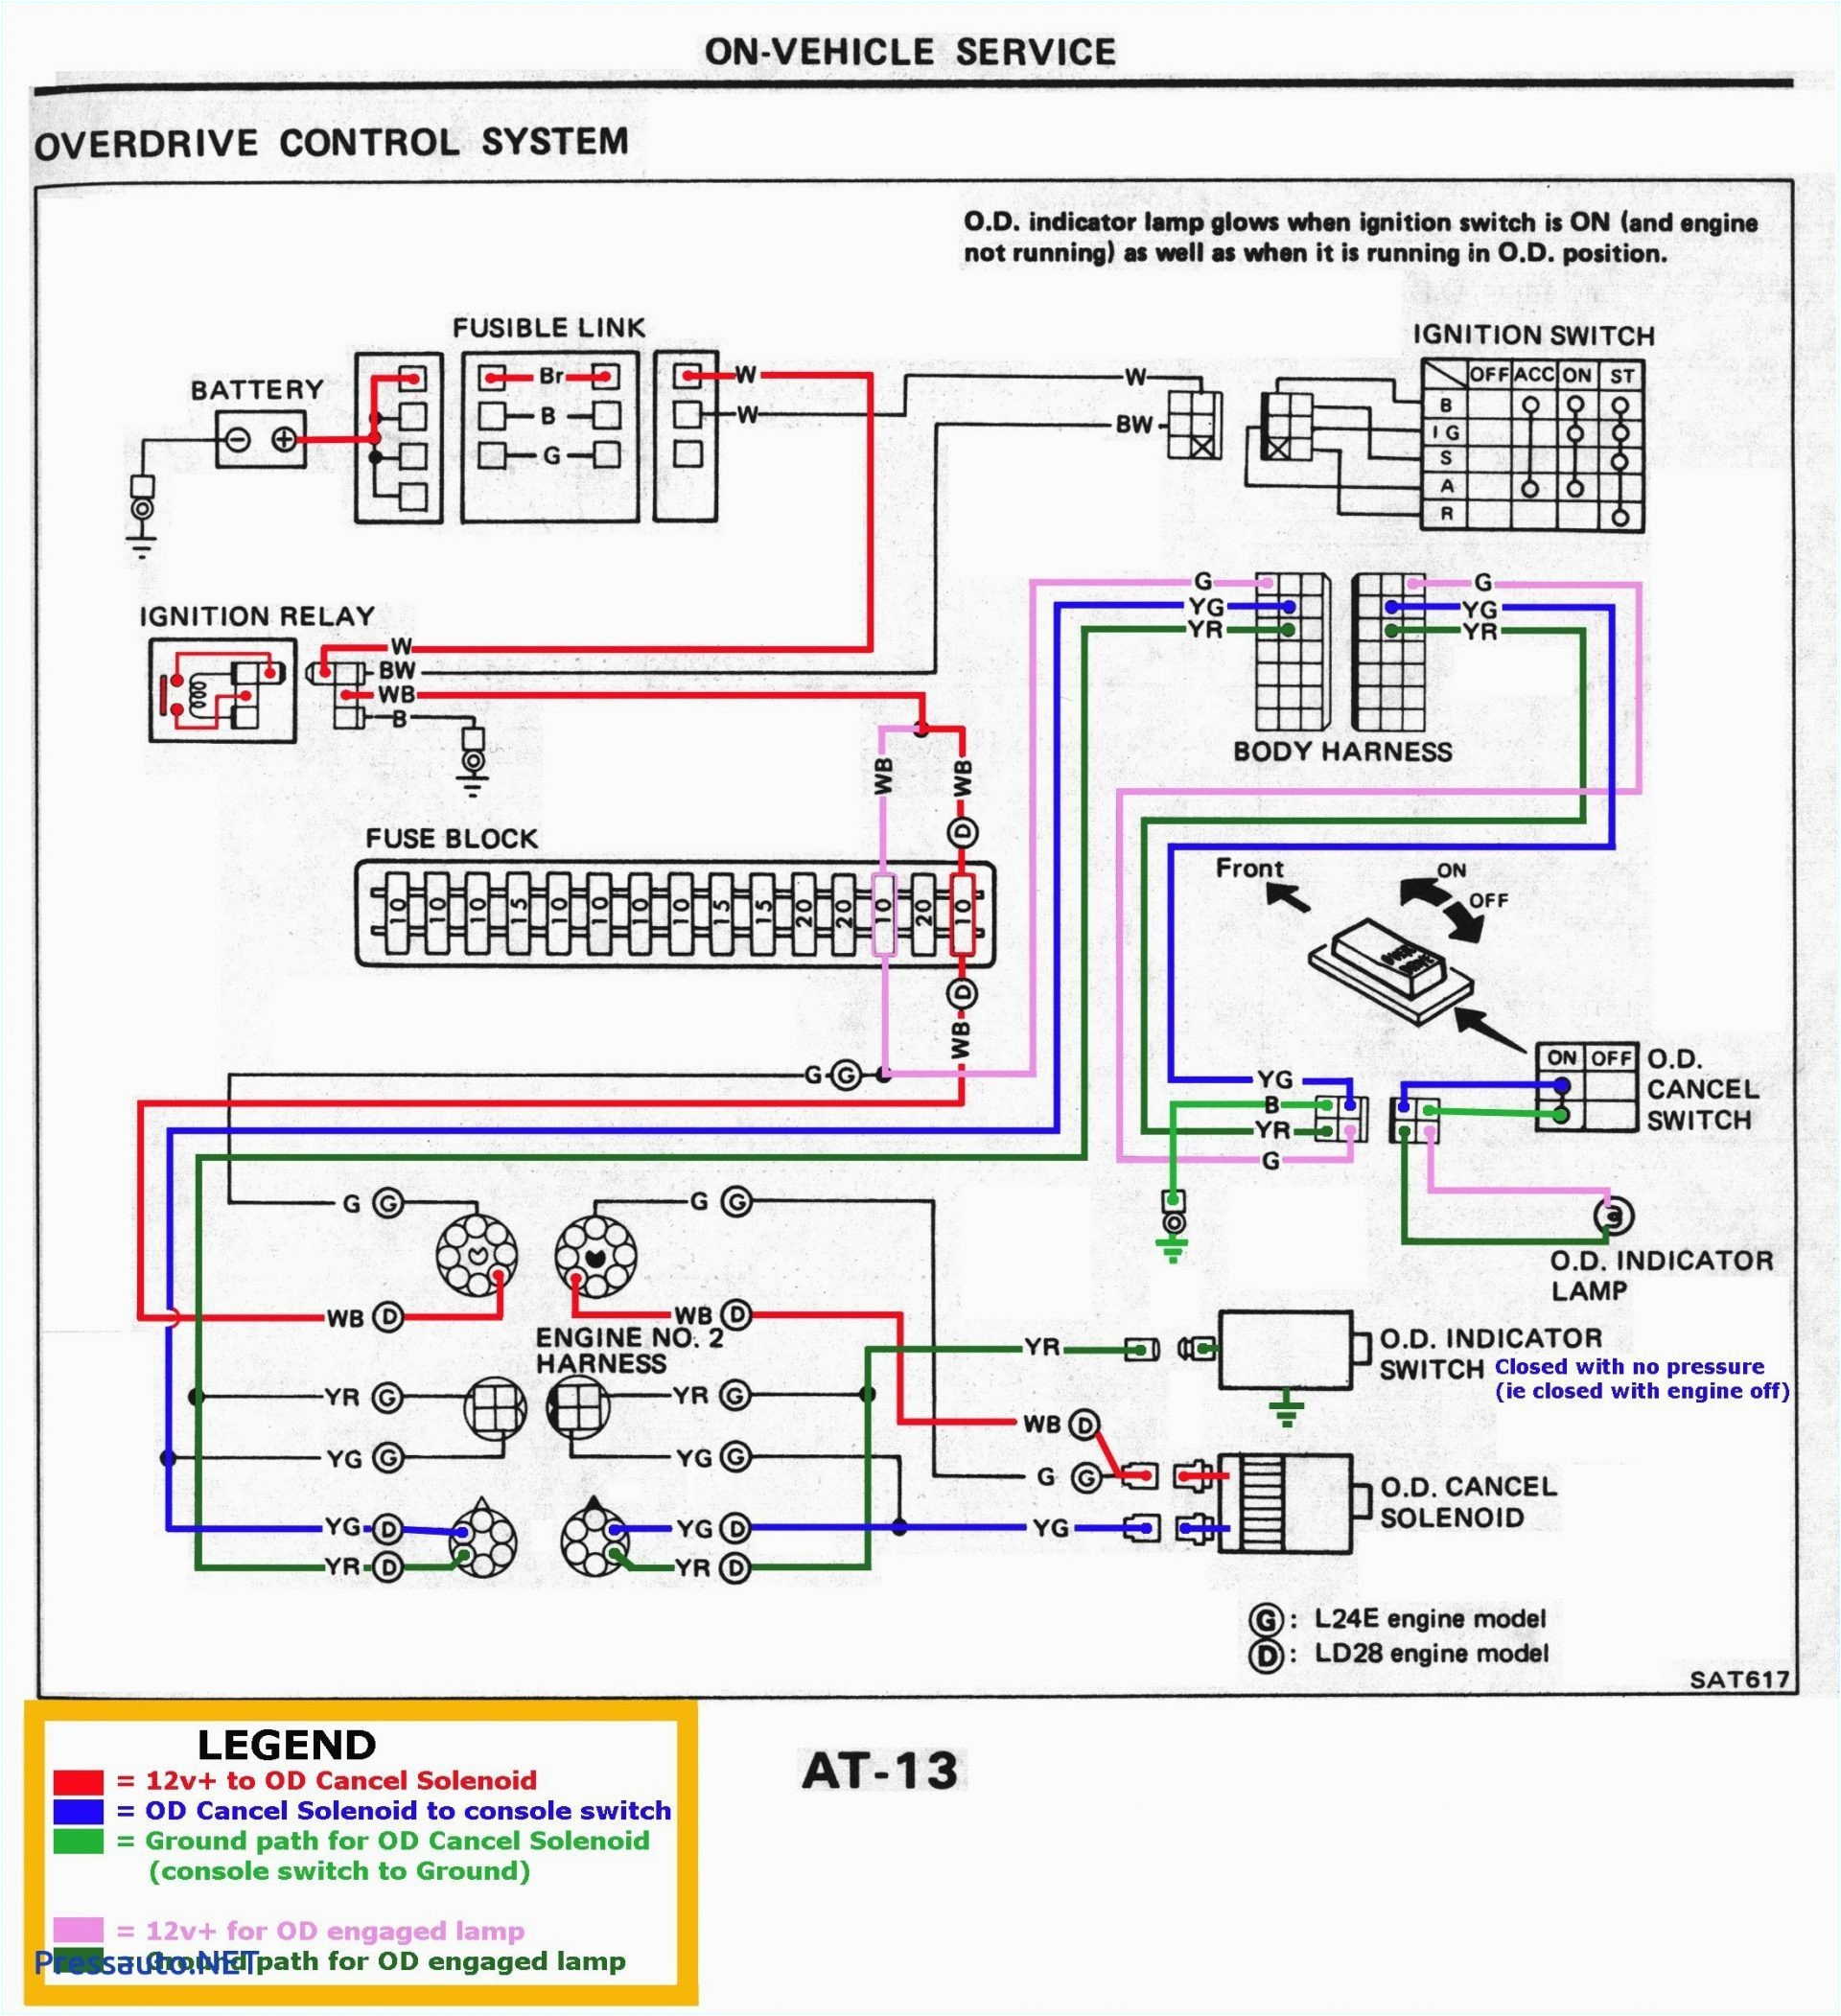 color wiring schematic wiring diagram expert wiring diagram color code abbreviations